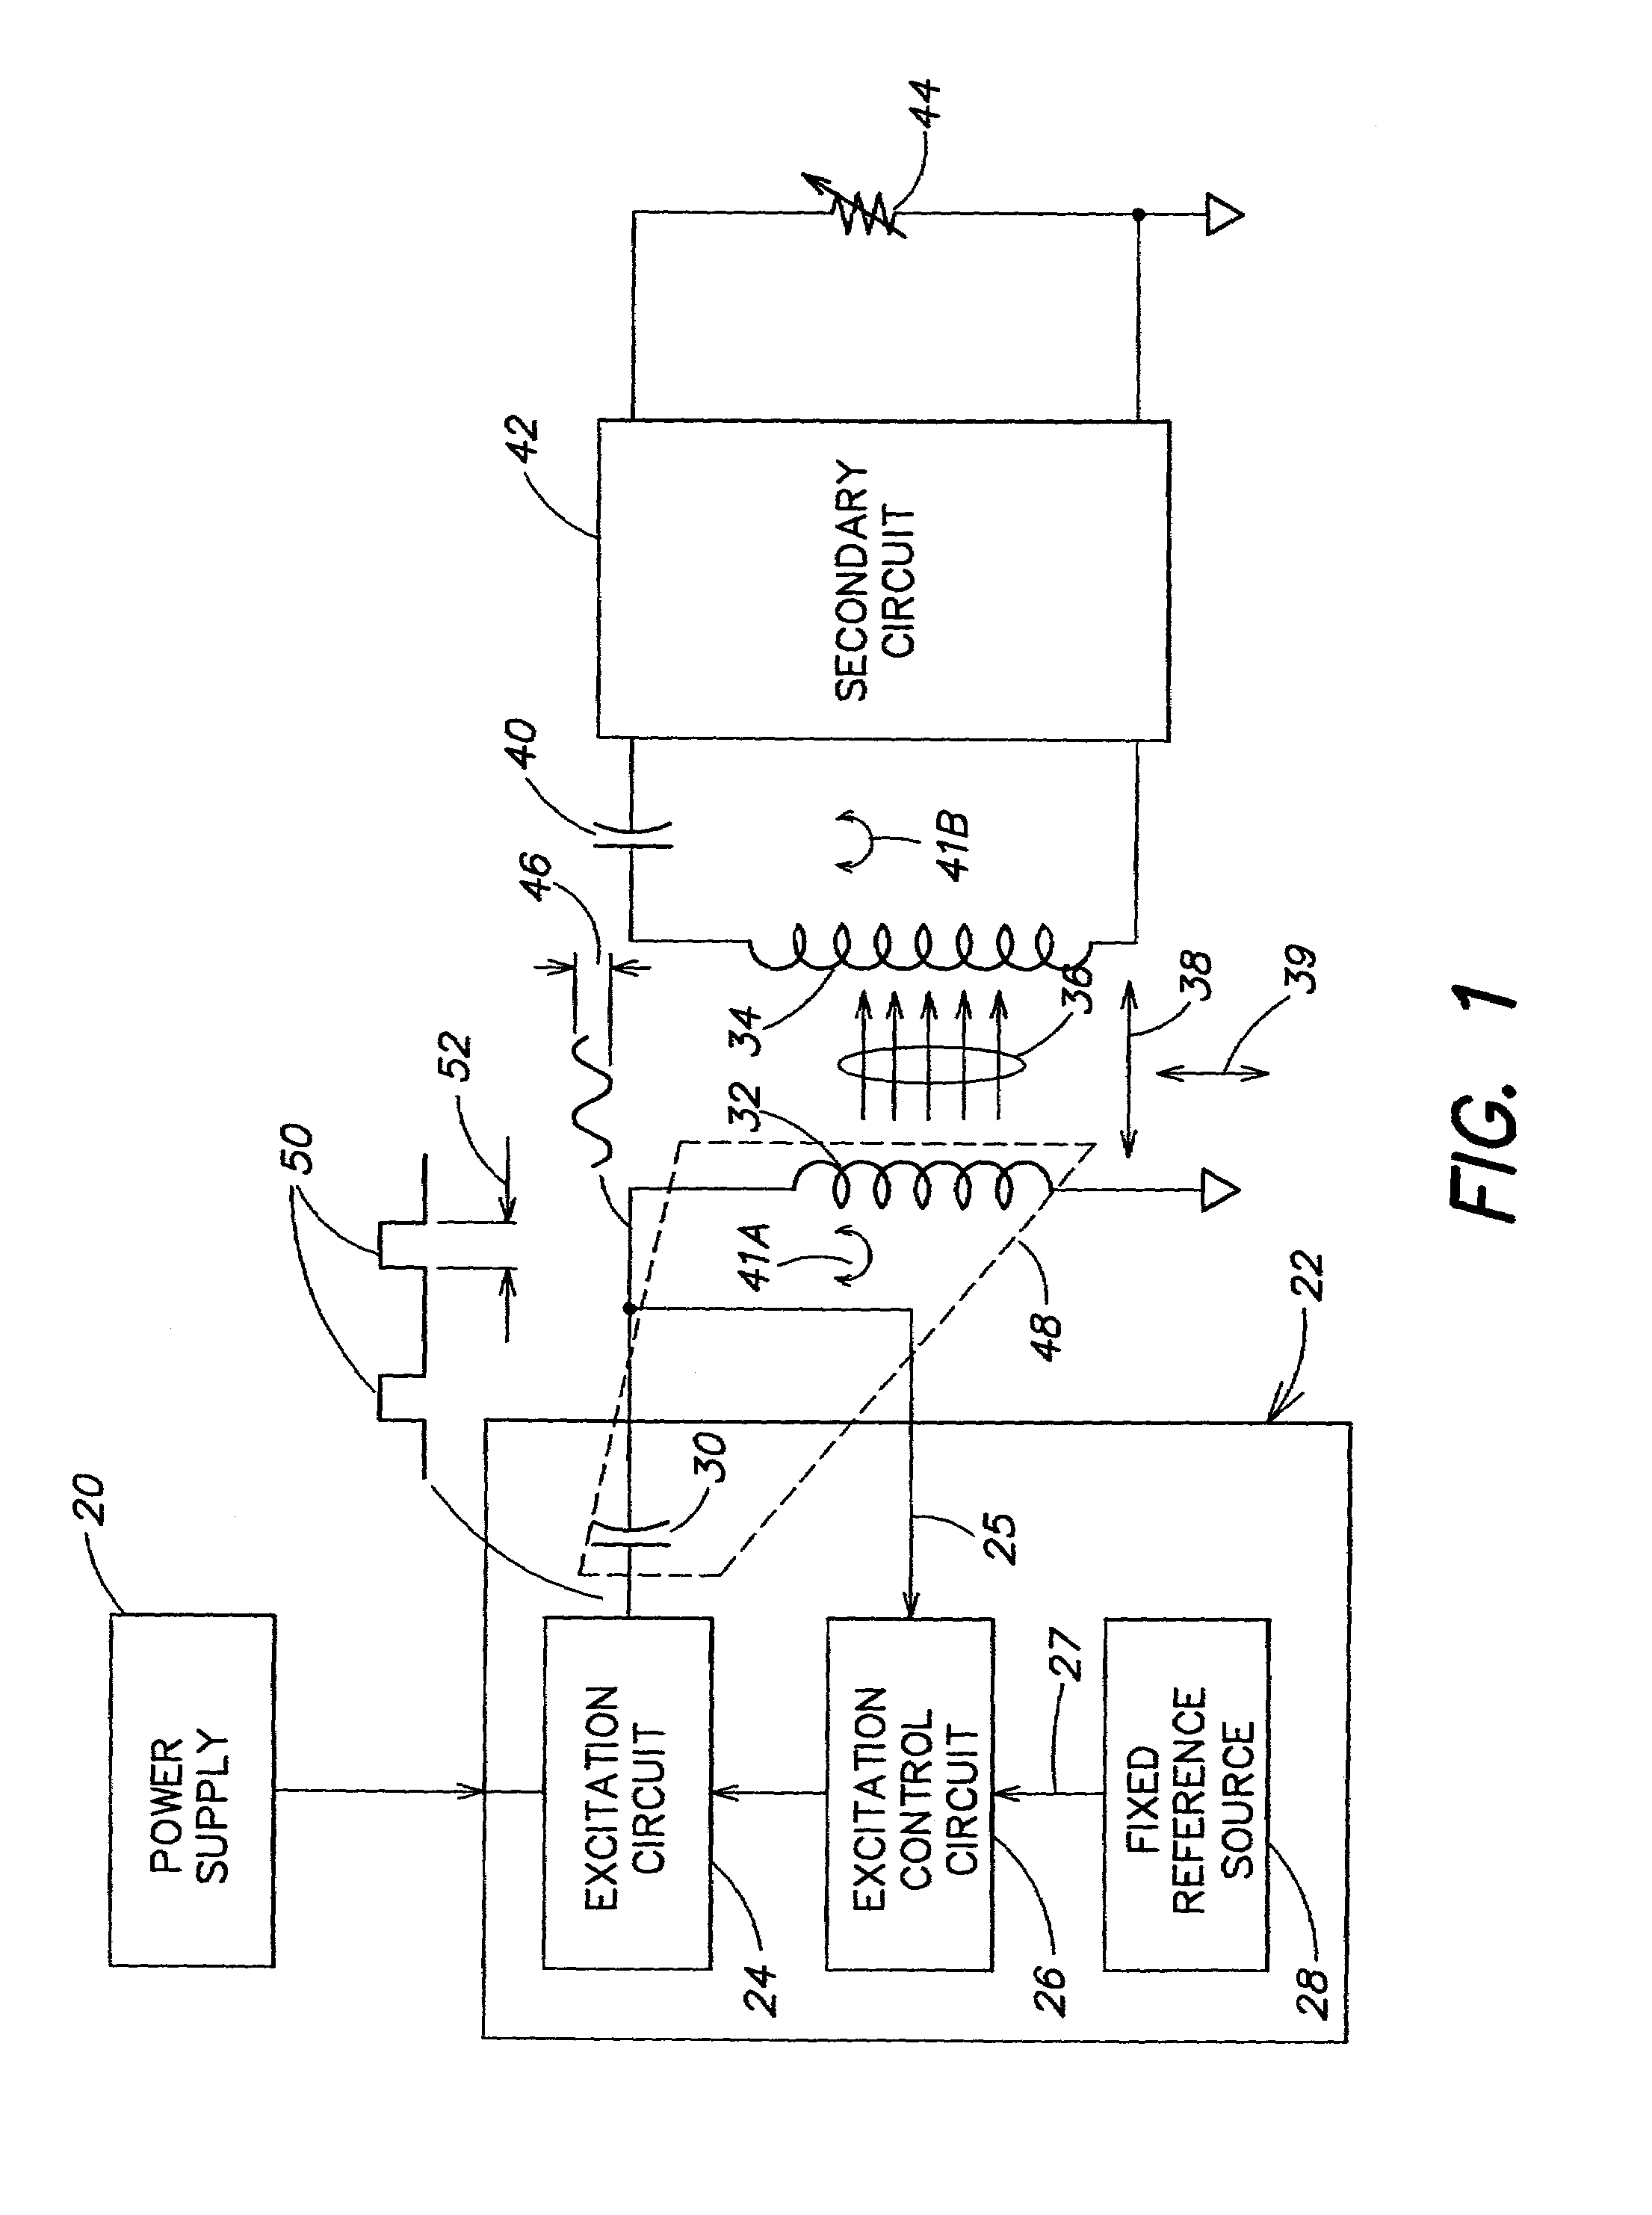 Methods and apparatus for providing a sufficiently stable power to a load in an energy transfer system